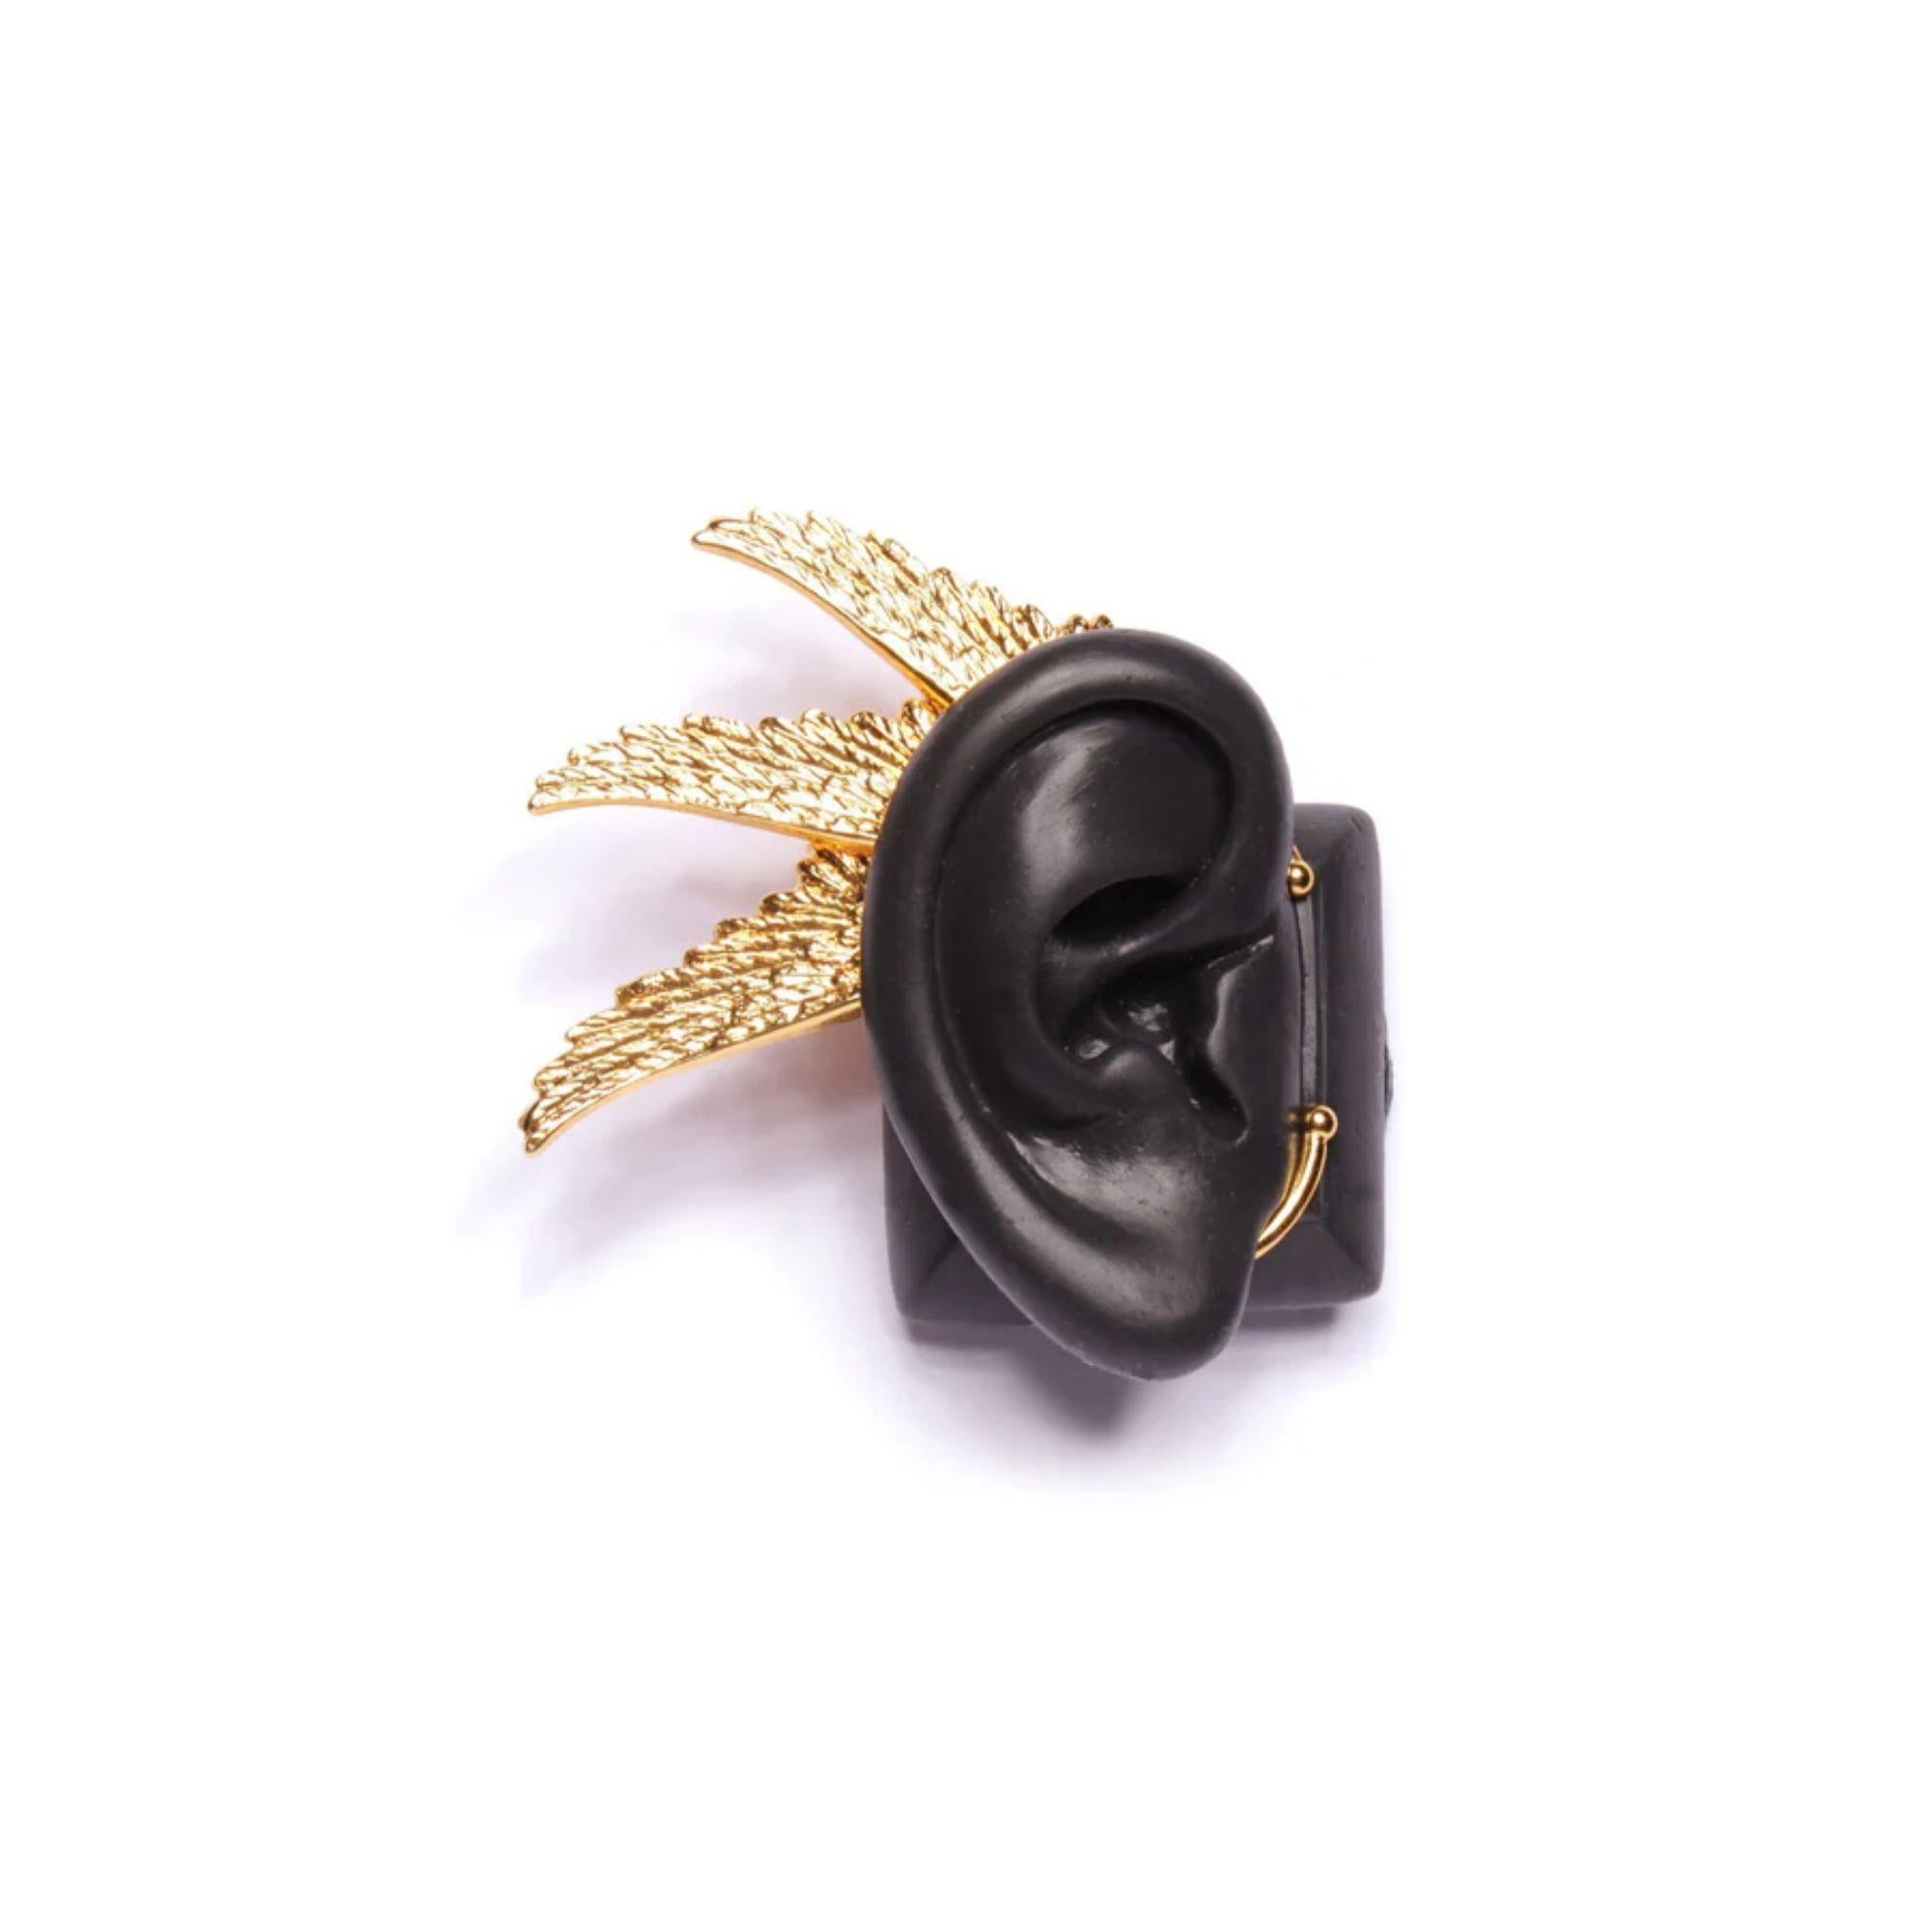 Our winged earcuff frames your ear and can be worn with the wing upward to hold your hair, or downward for an earring effect. It really is the ultimate conversation piece and all you need to really spread your wings and fly. 

Additional